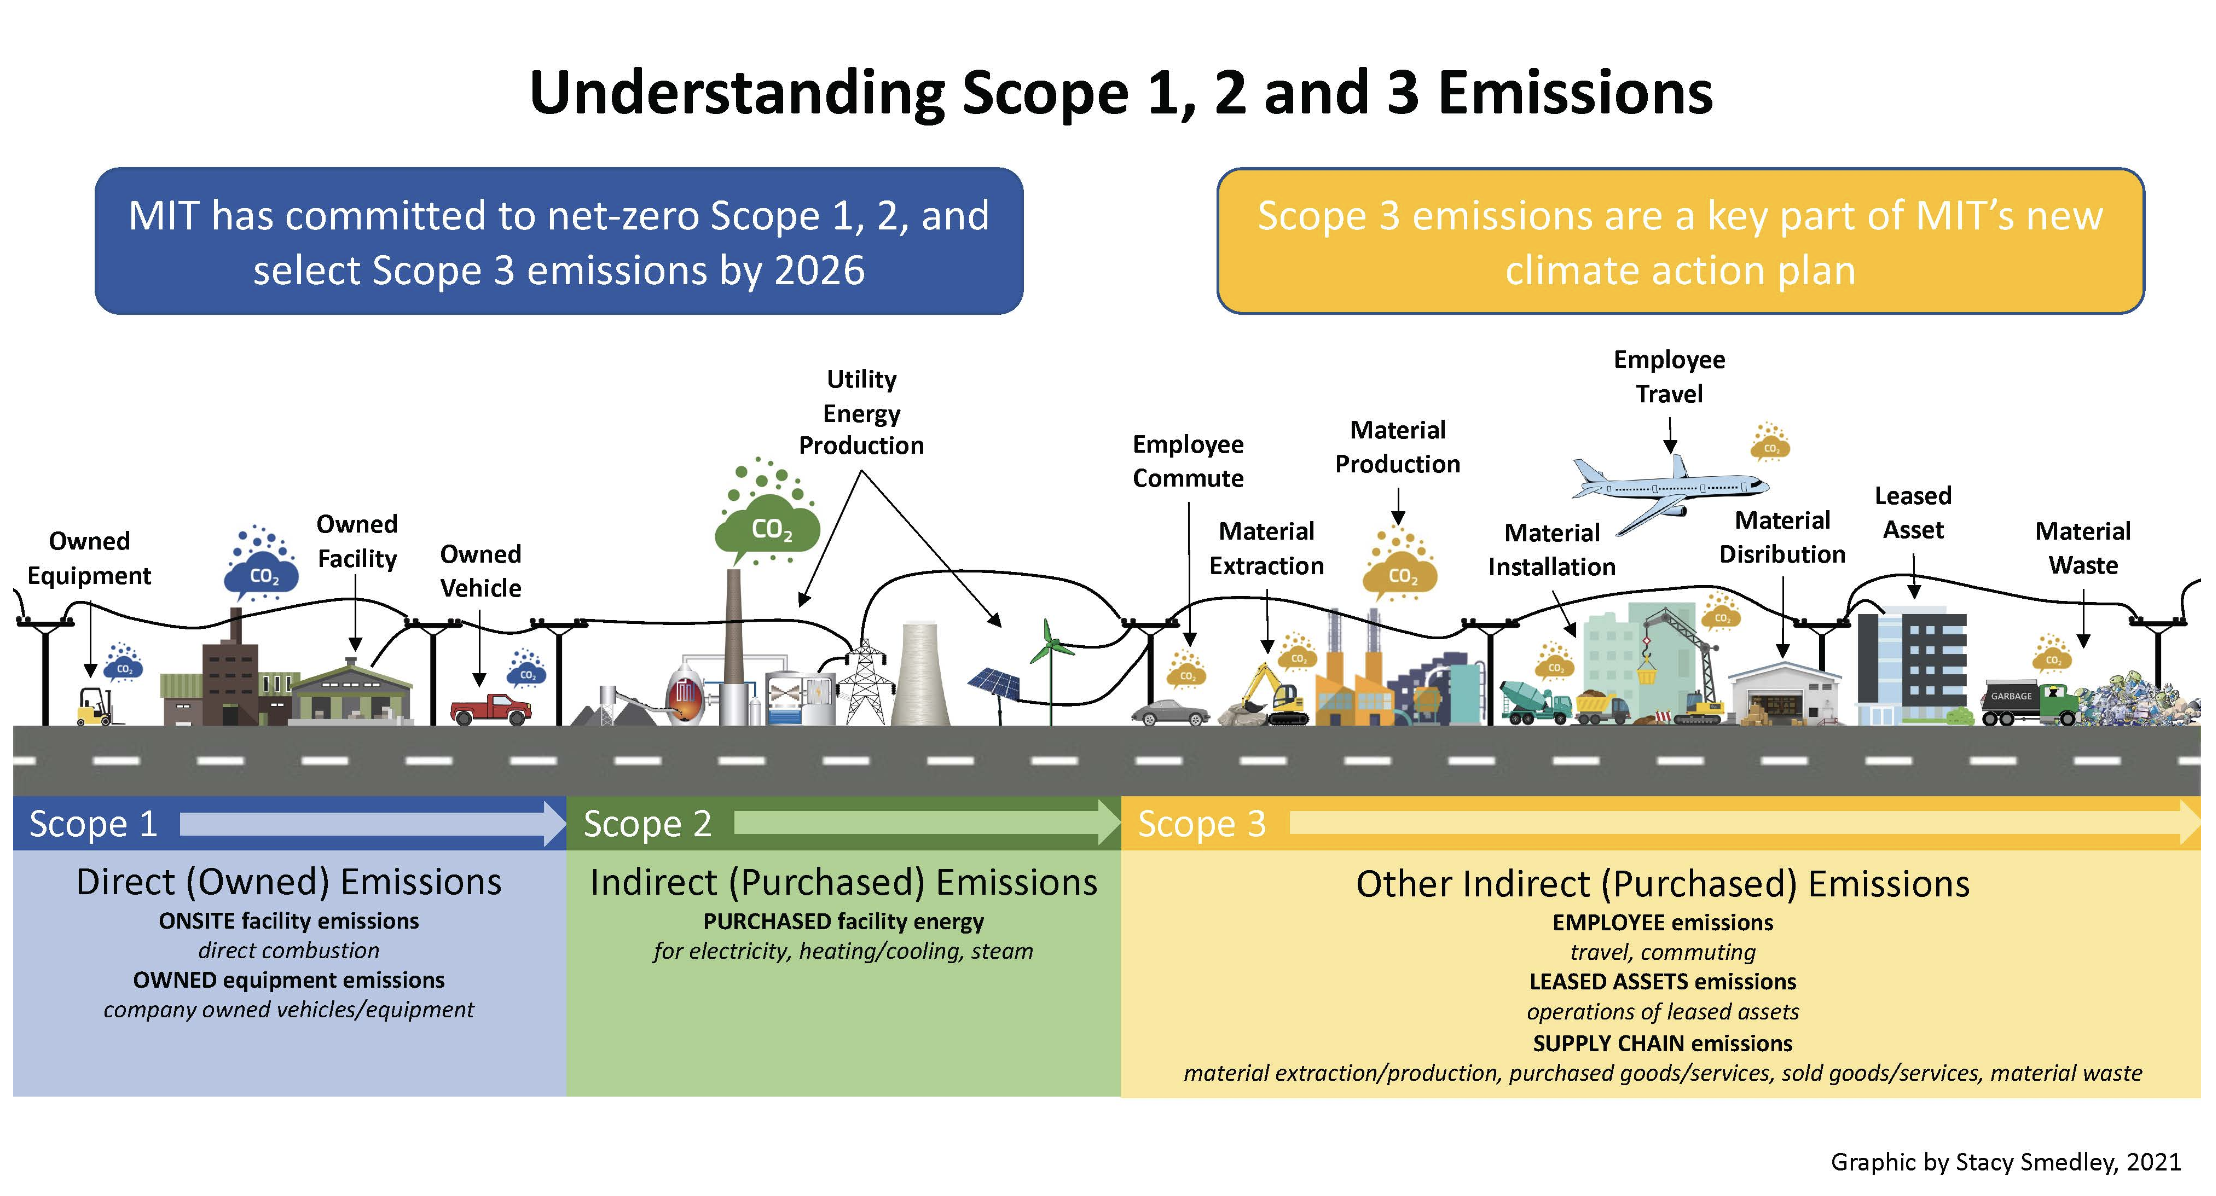 emissions defined by scope